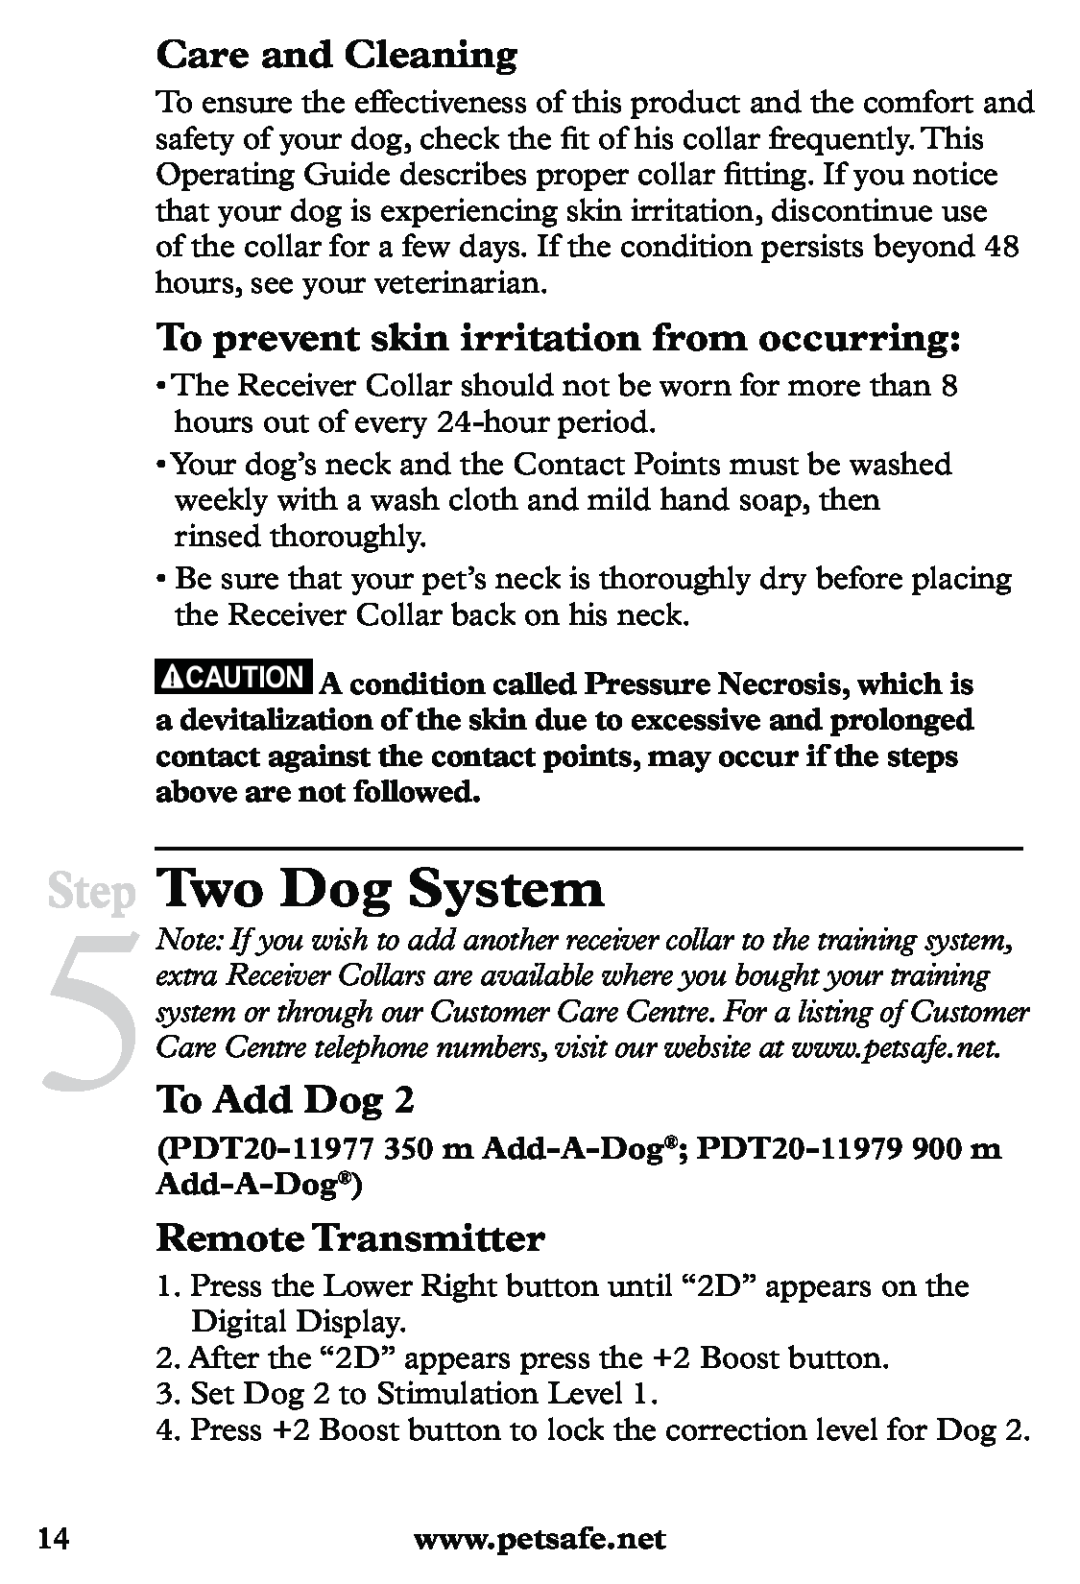 Petsafe PDT20-11939 Step Two Dog System, Care and Cleaning, To prevent skin irritation from occurring, To Add Dog 